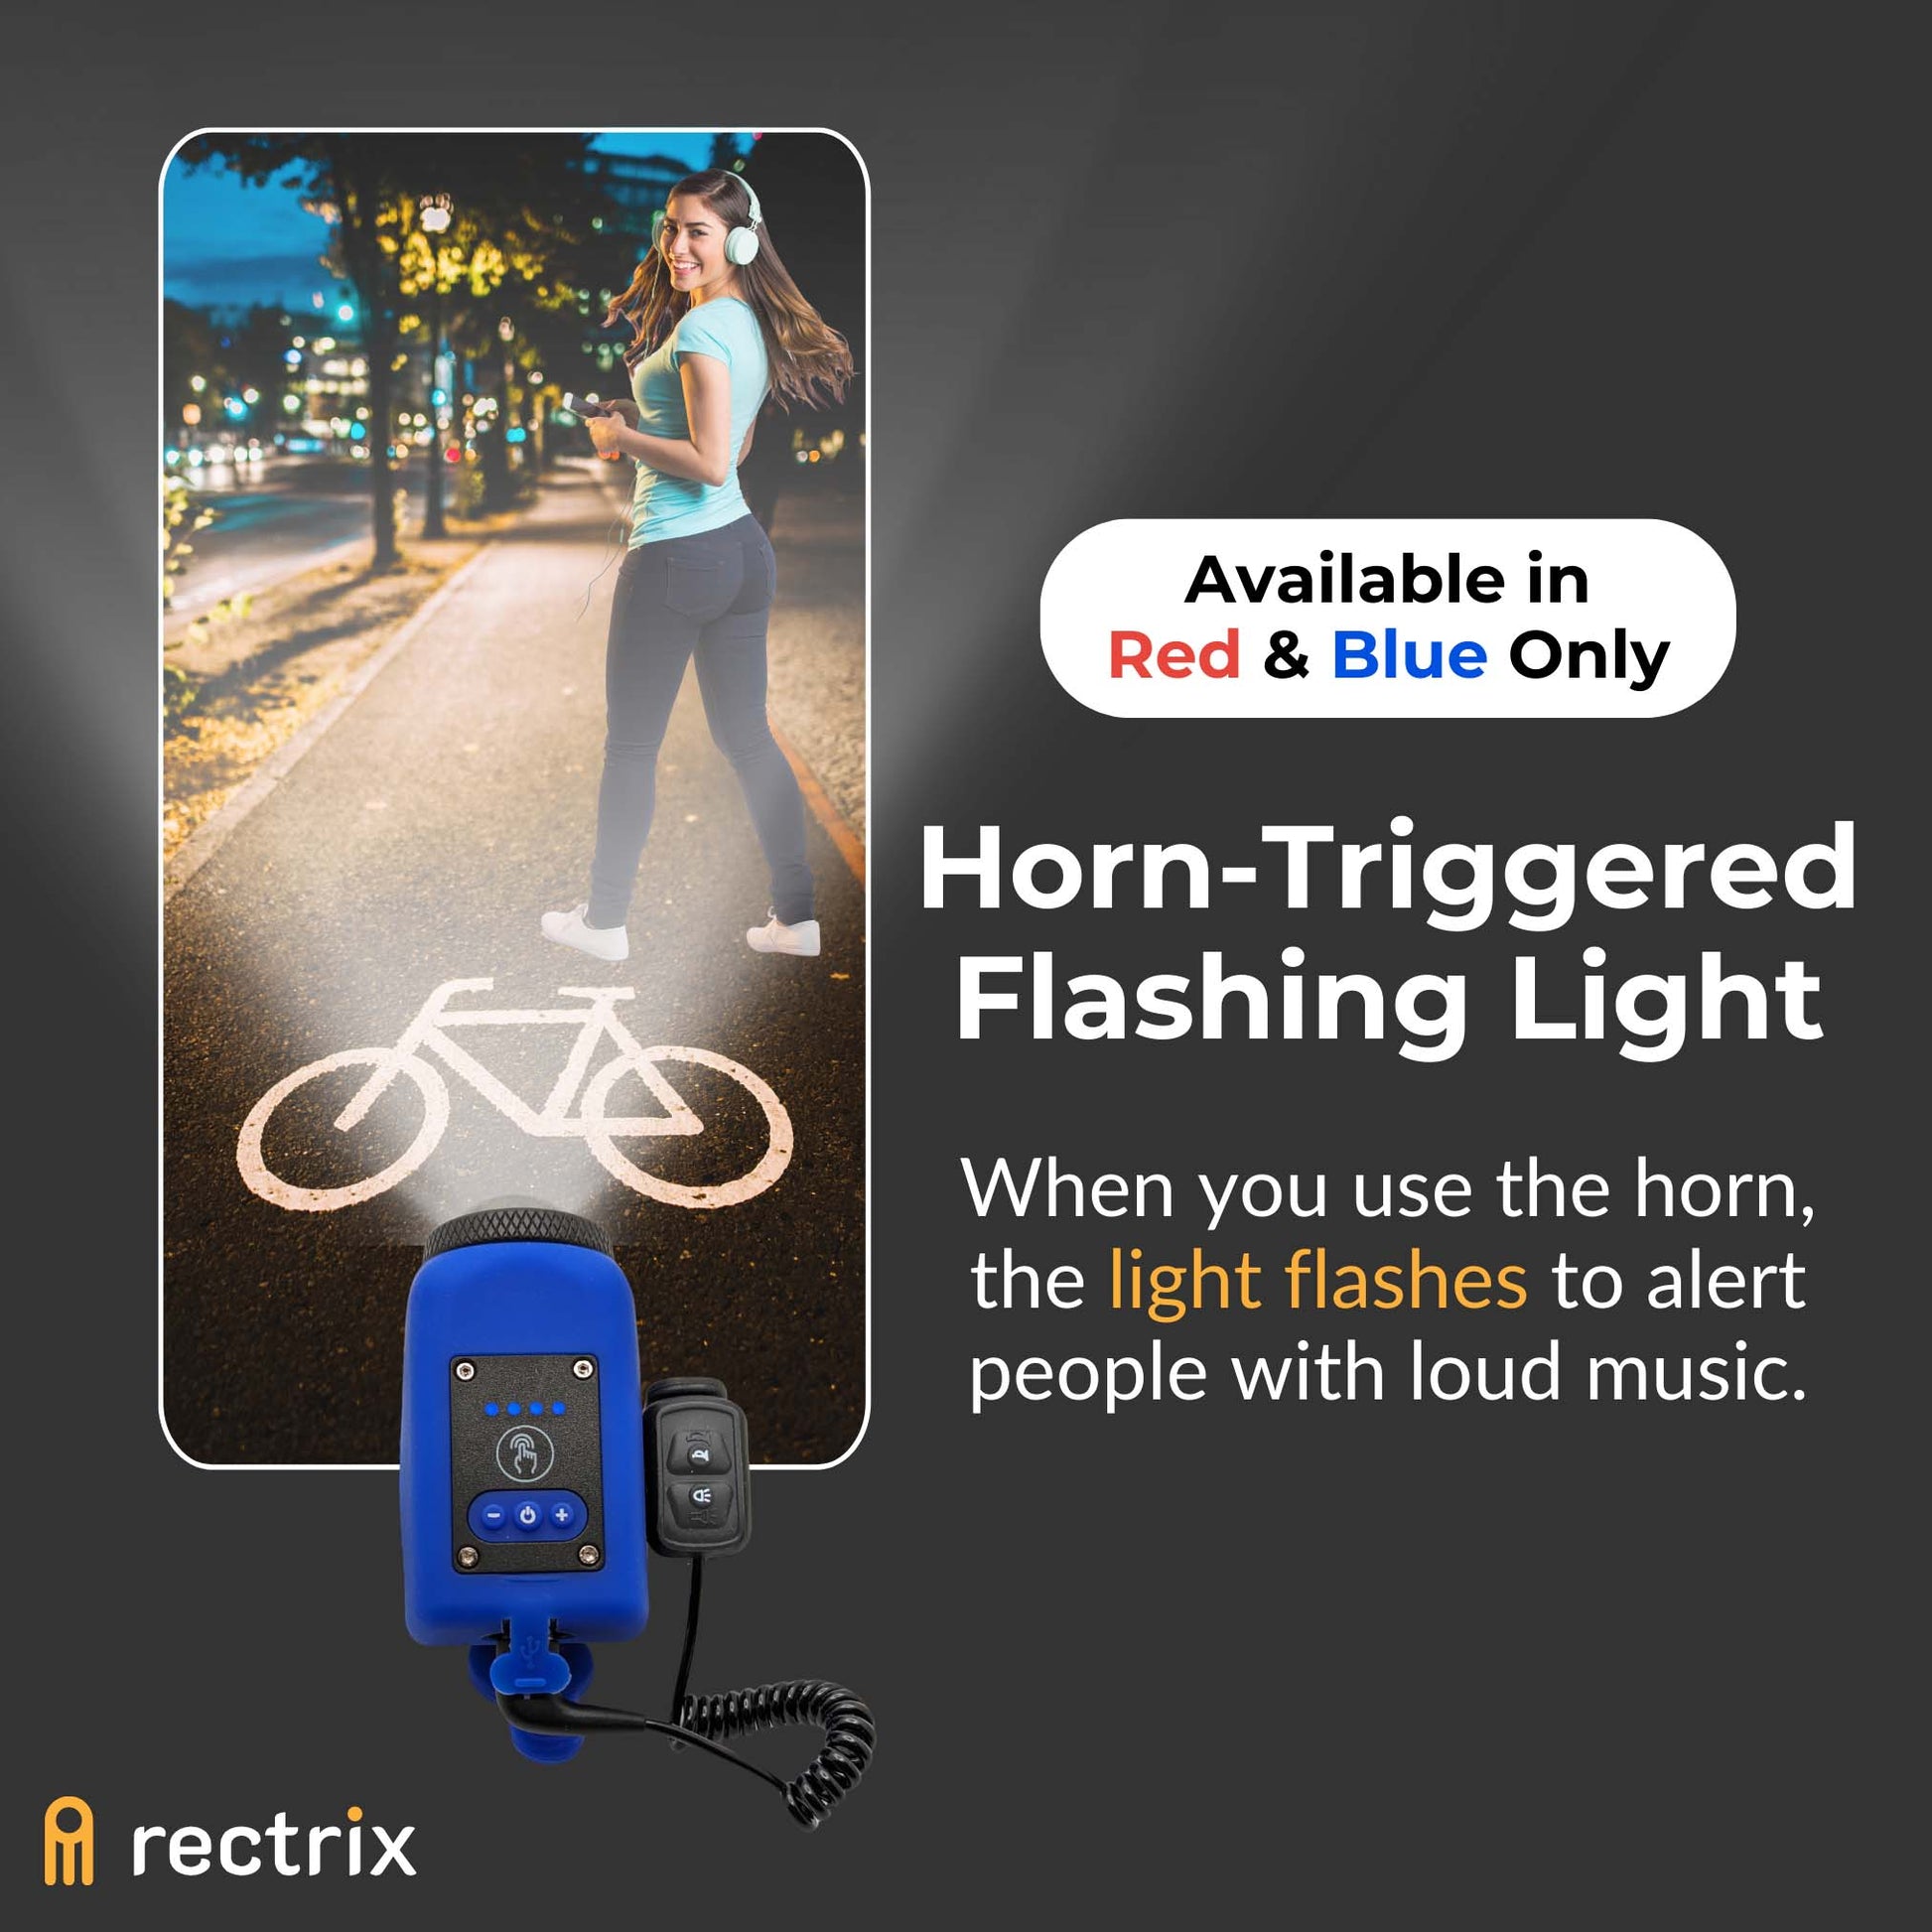 Bike horn flashes light when user activates the horn to alert individuals, especially those with loud music